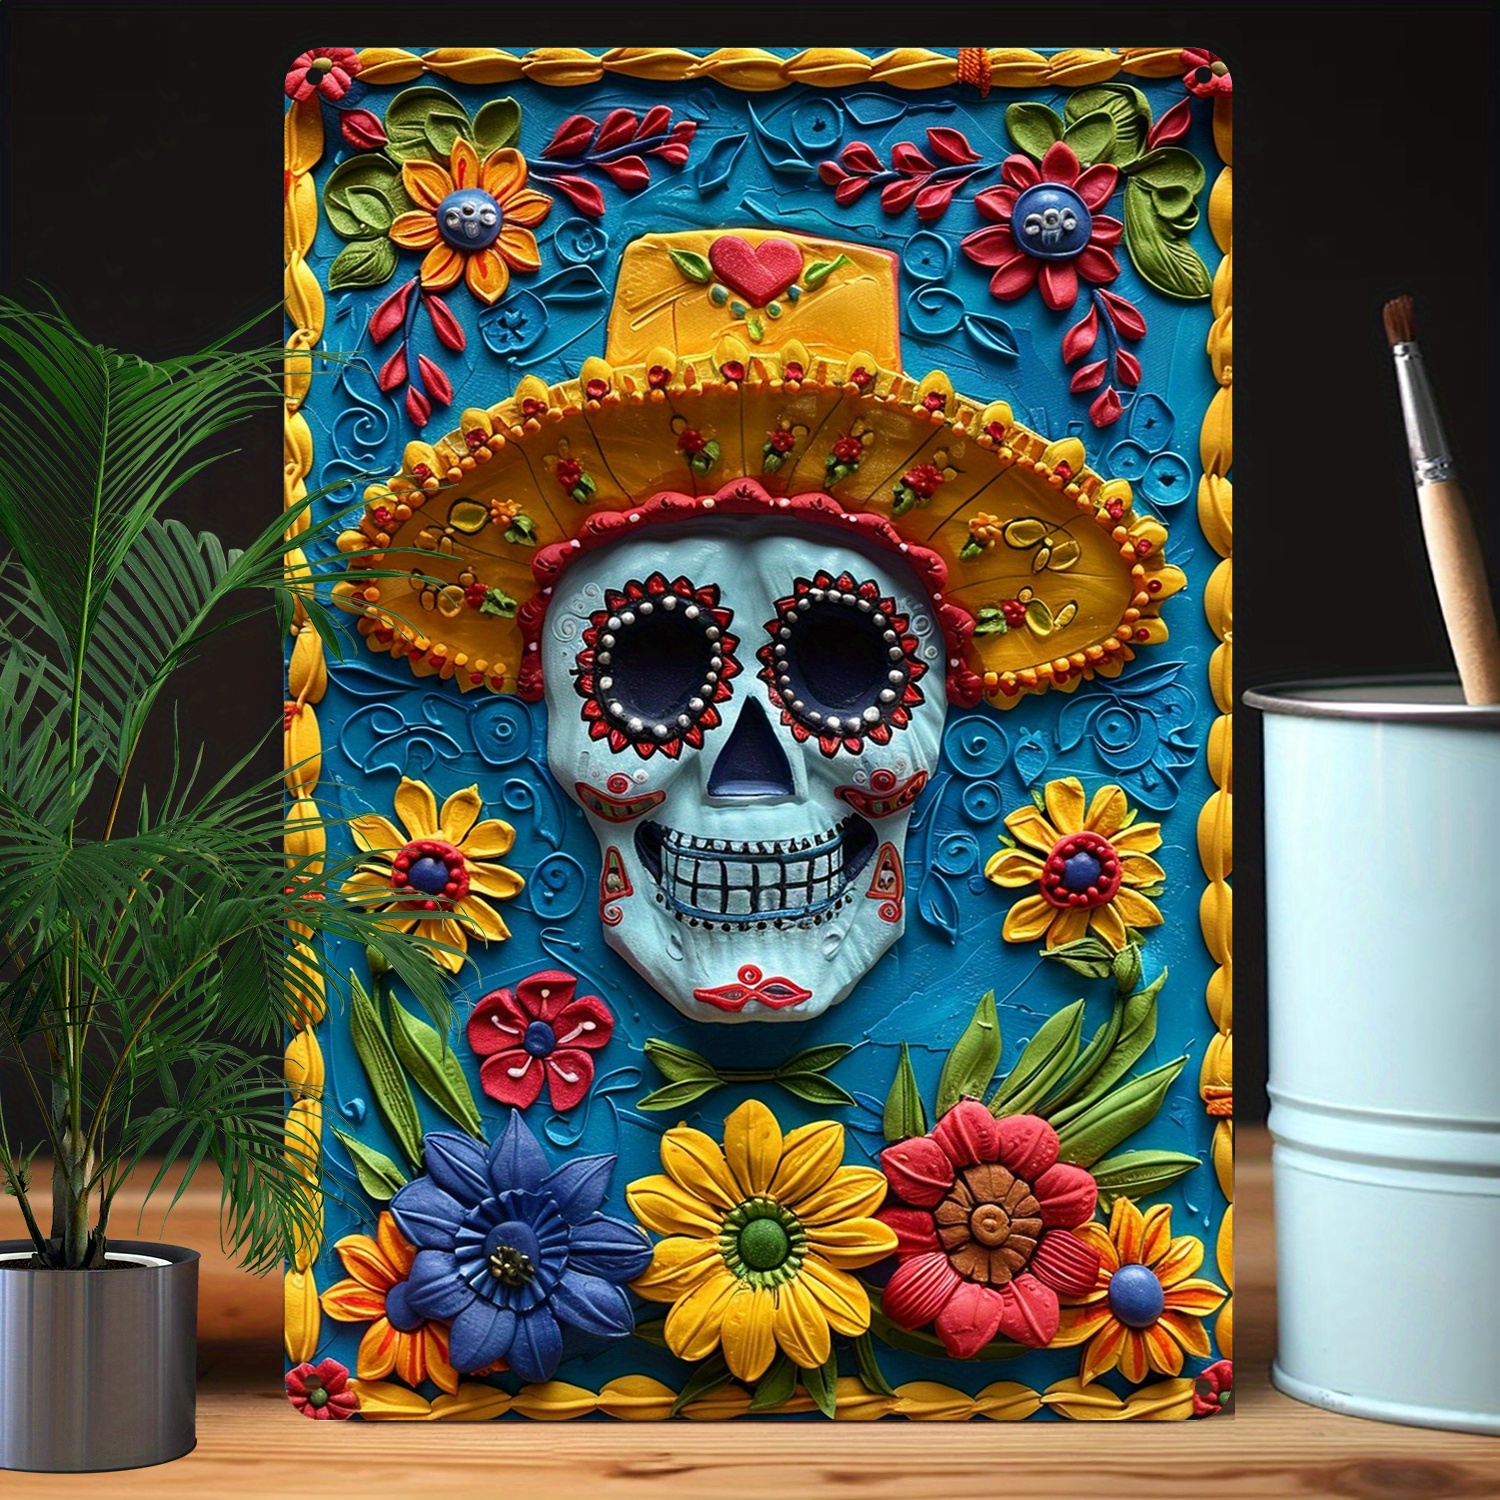 

Mexican Culture Themed Aluminum Wall Art - Durable Metal Decor With Vivid 3d Floral & Design, Moisture Resistant, High Bend Resistance - Perfect For Home, Office, Studio - Unique Gift Idea A1435